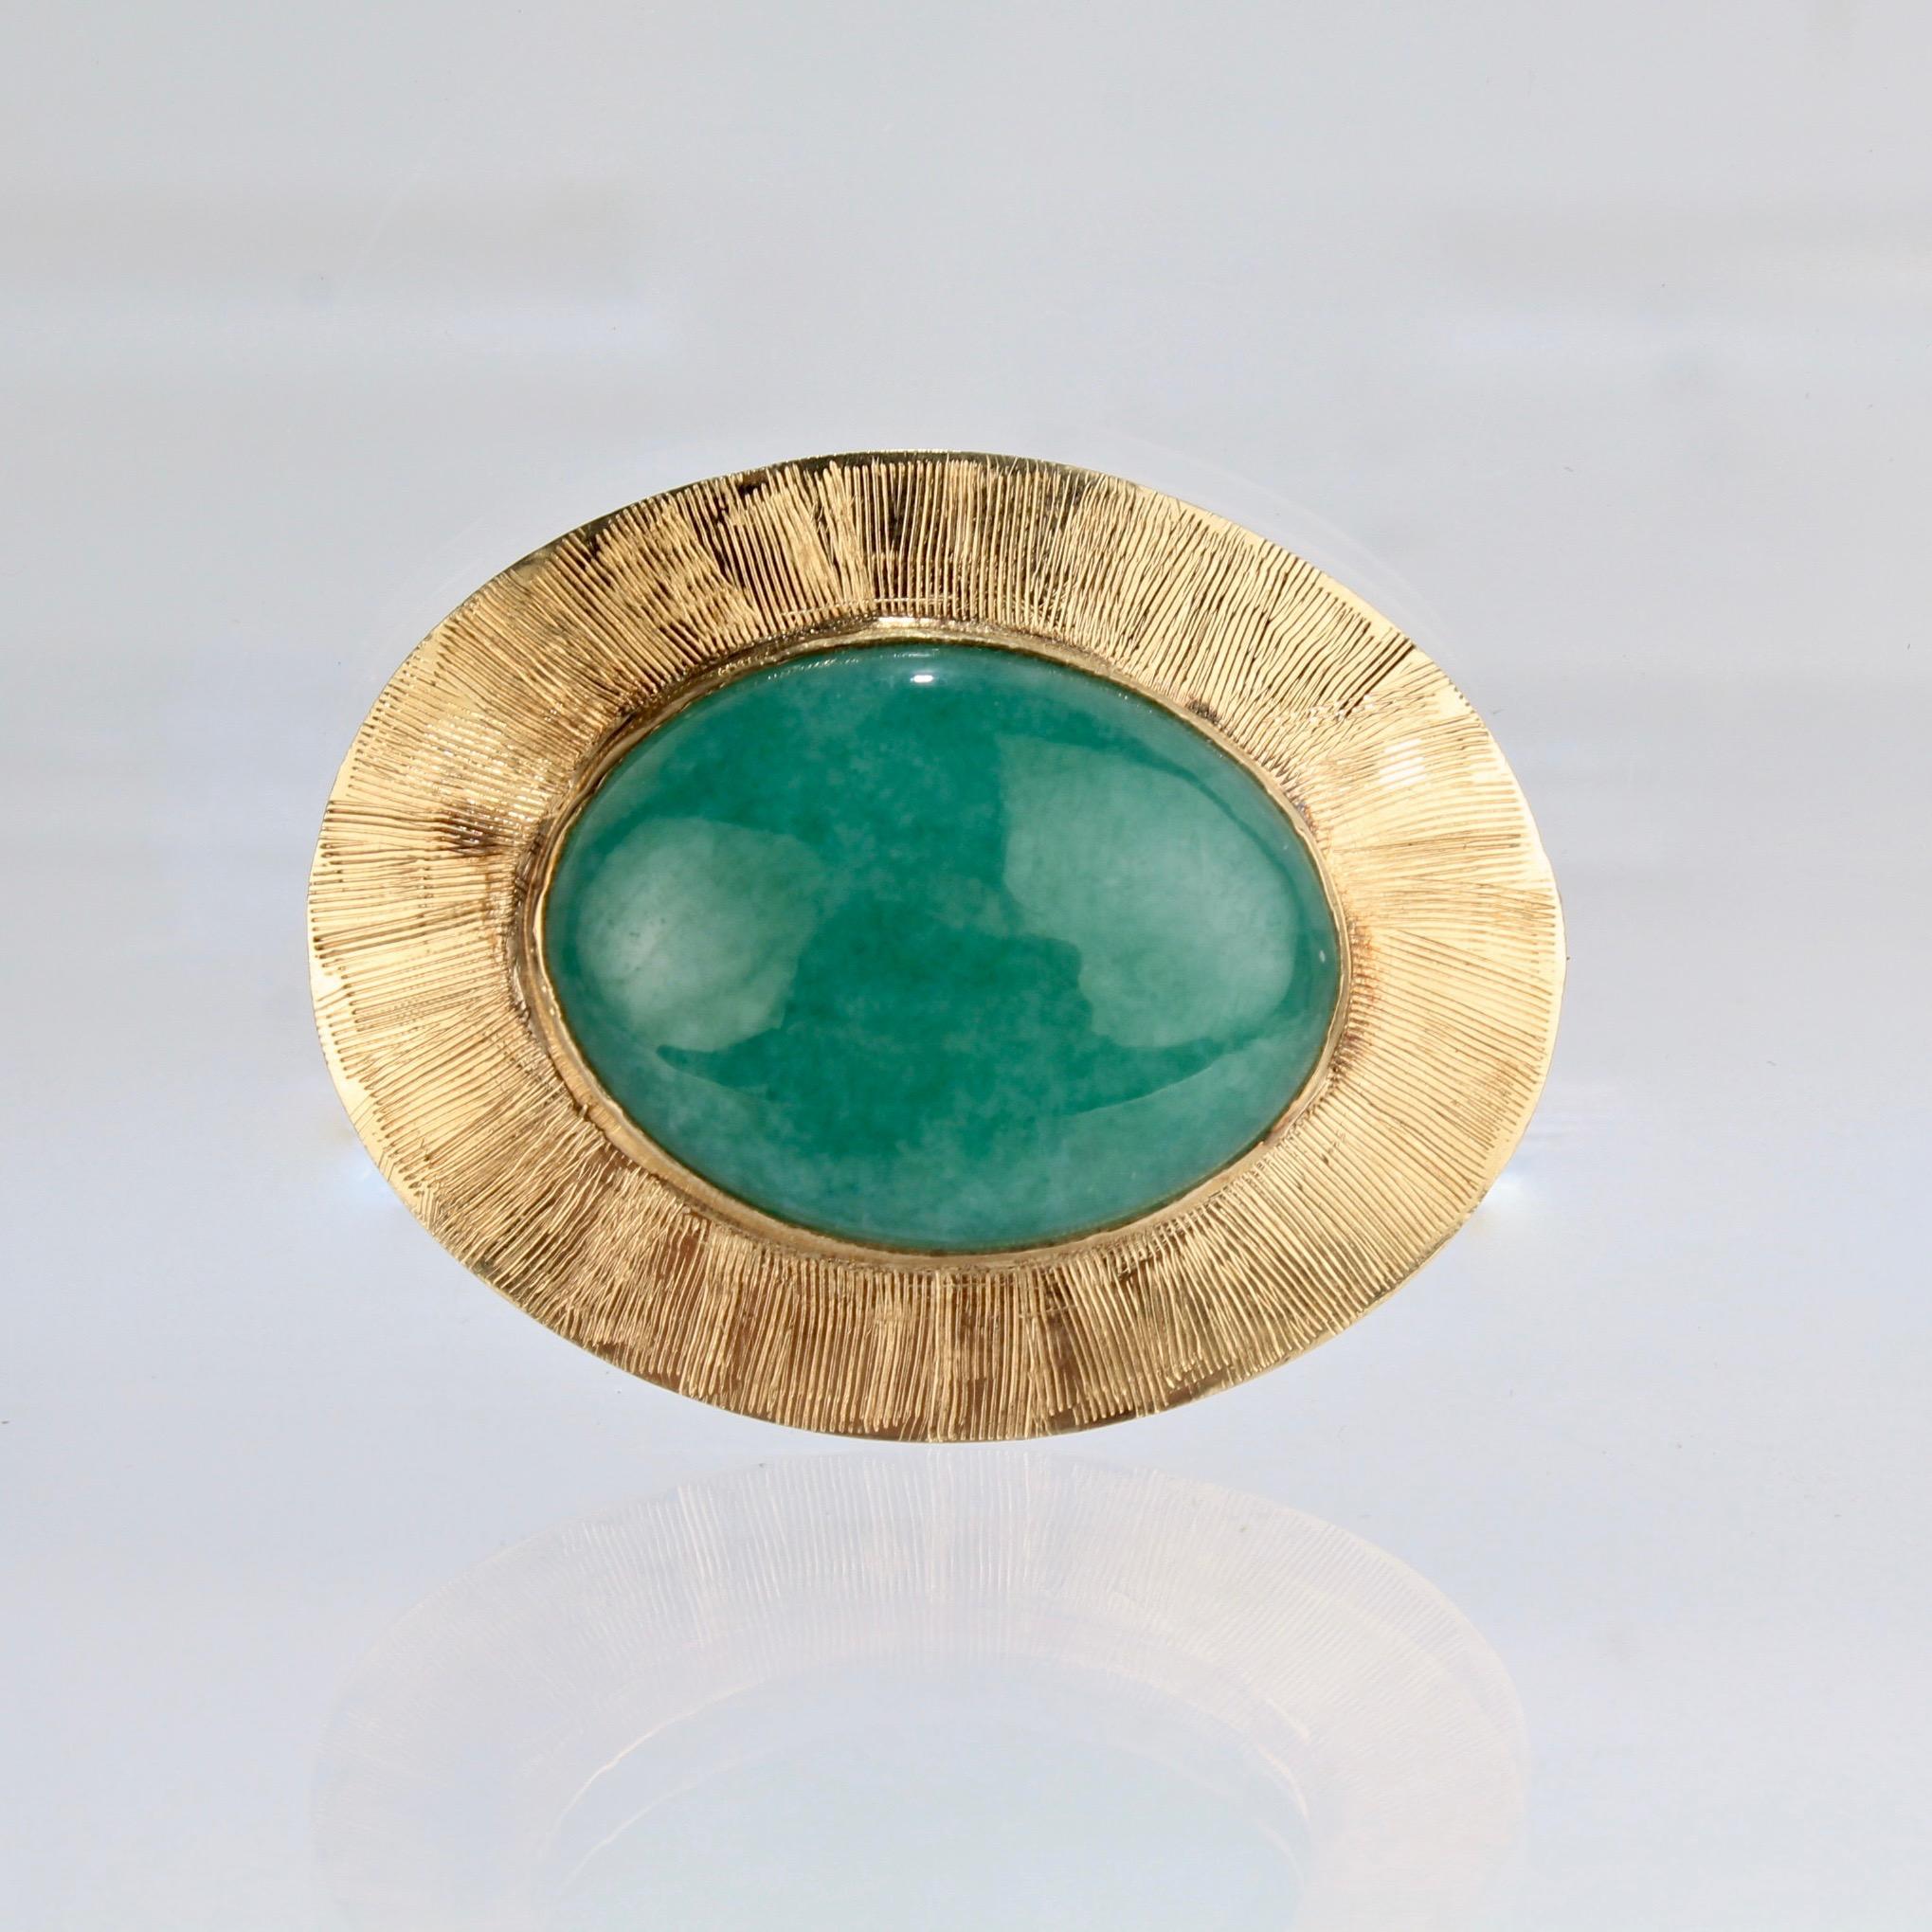 A fine vintage gold and jade brooch or pin.

With a jadeite cabochon bezel set in a textured gold setting. 

Marked to the reverse 14K for gold fineness.

Width: ca. 32 mm

Items purchased from this dealer must delight you. Purchases may be returned